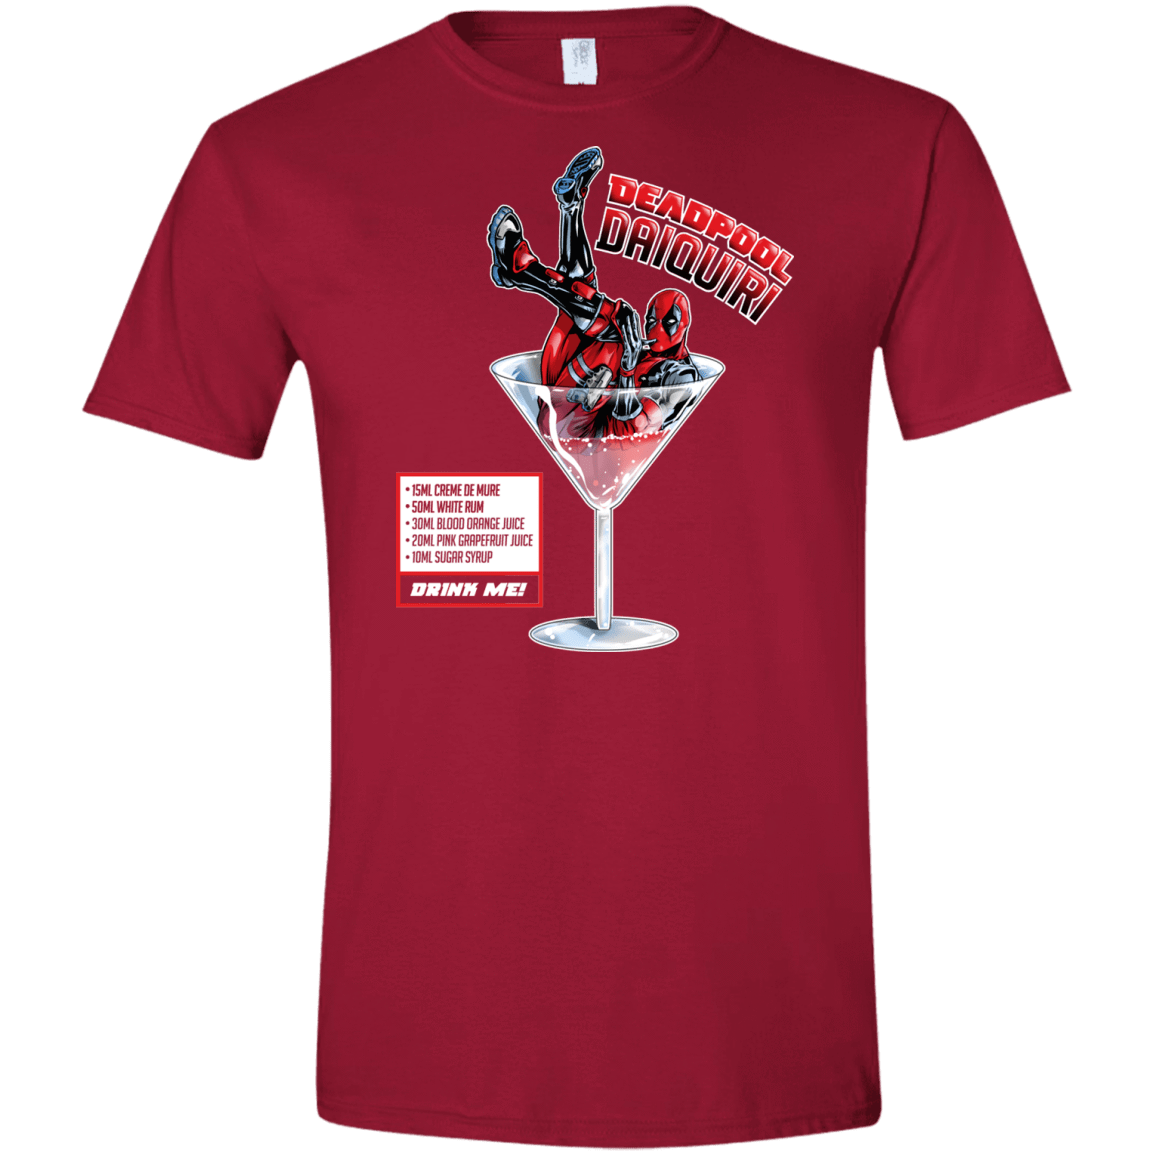 T-Shirts Cardinal Red / S Deadpool Daiquiri Men's Semi-Fitted Softstyle